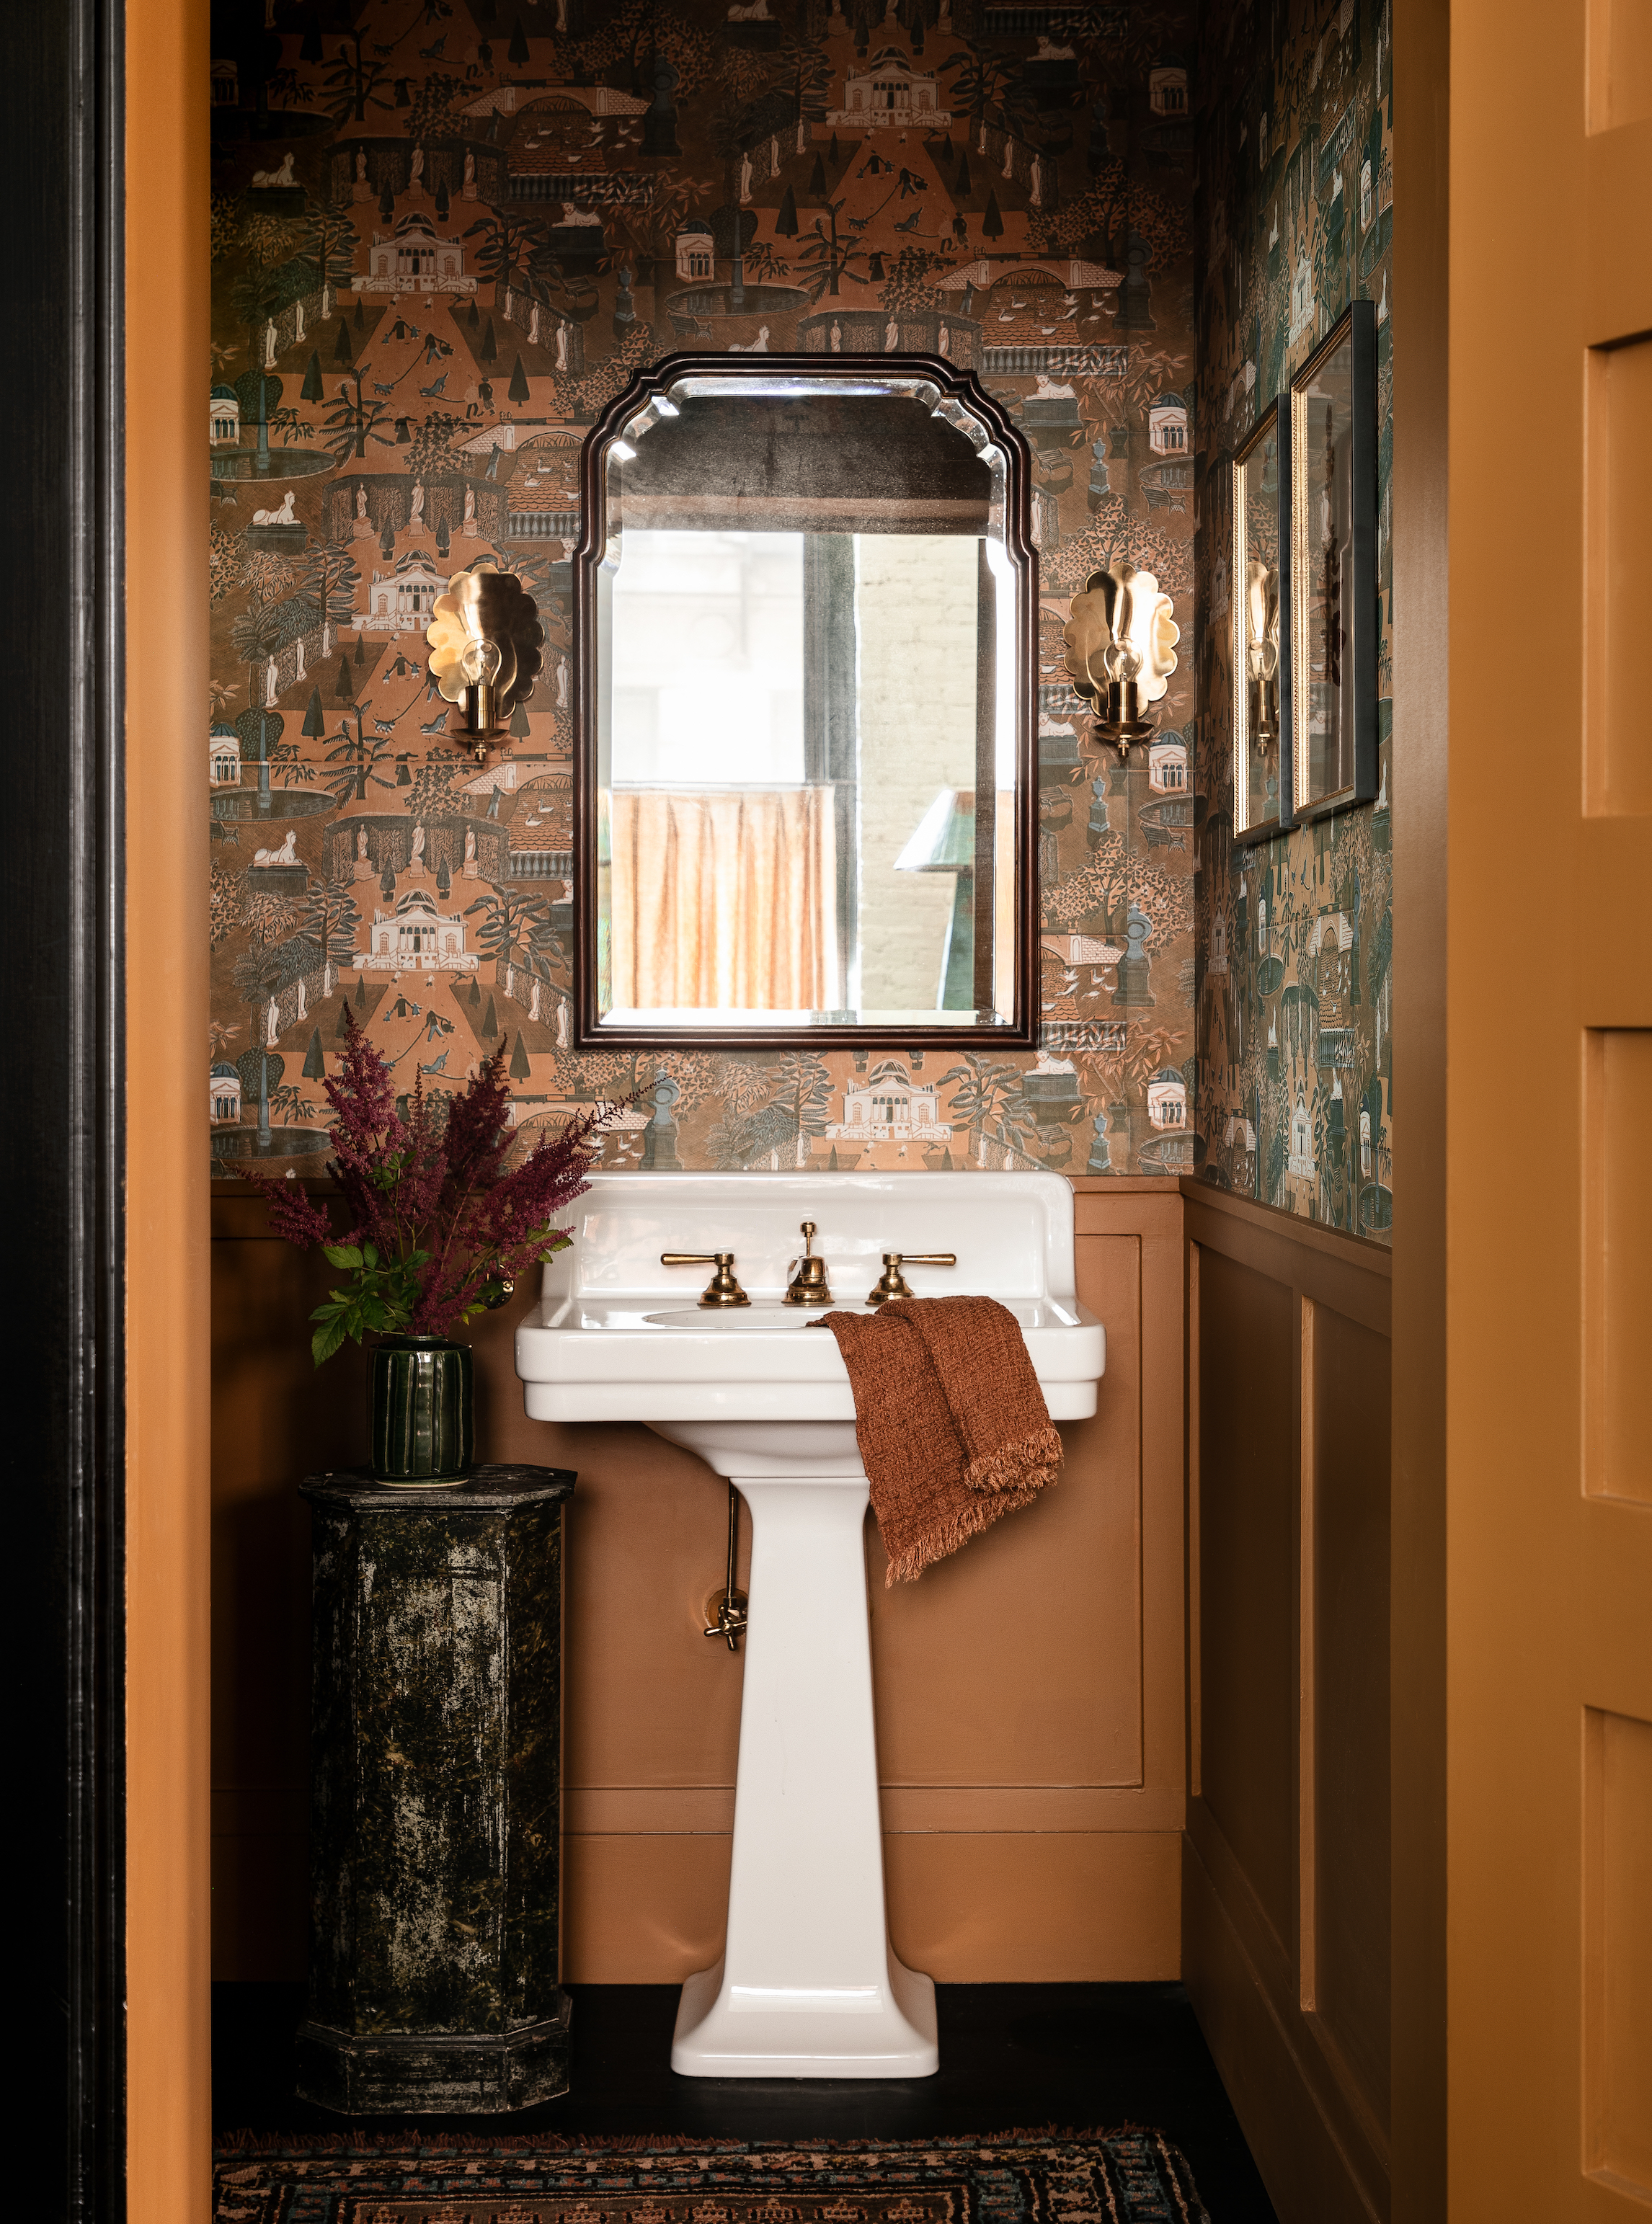 the powder room feels like stepping into a chinoiserie screen—set in the 20